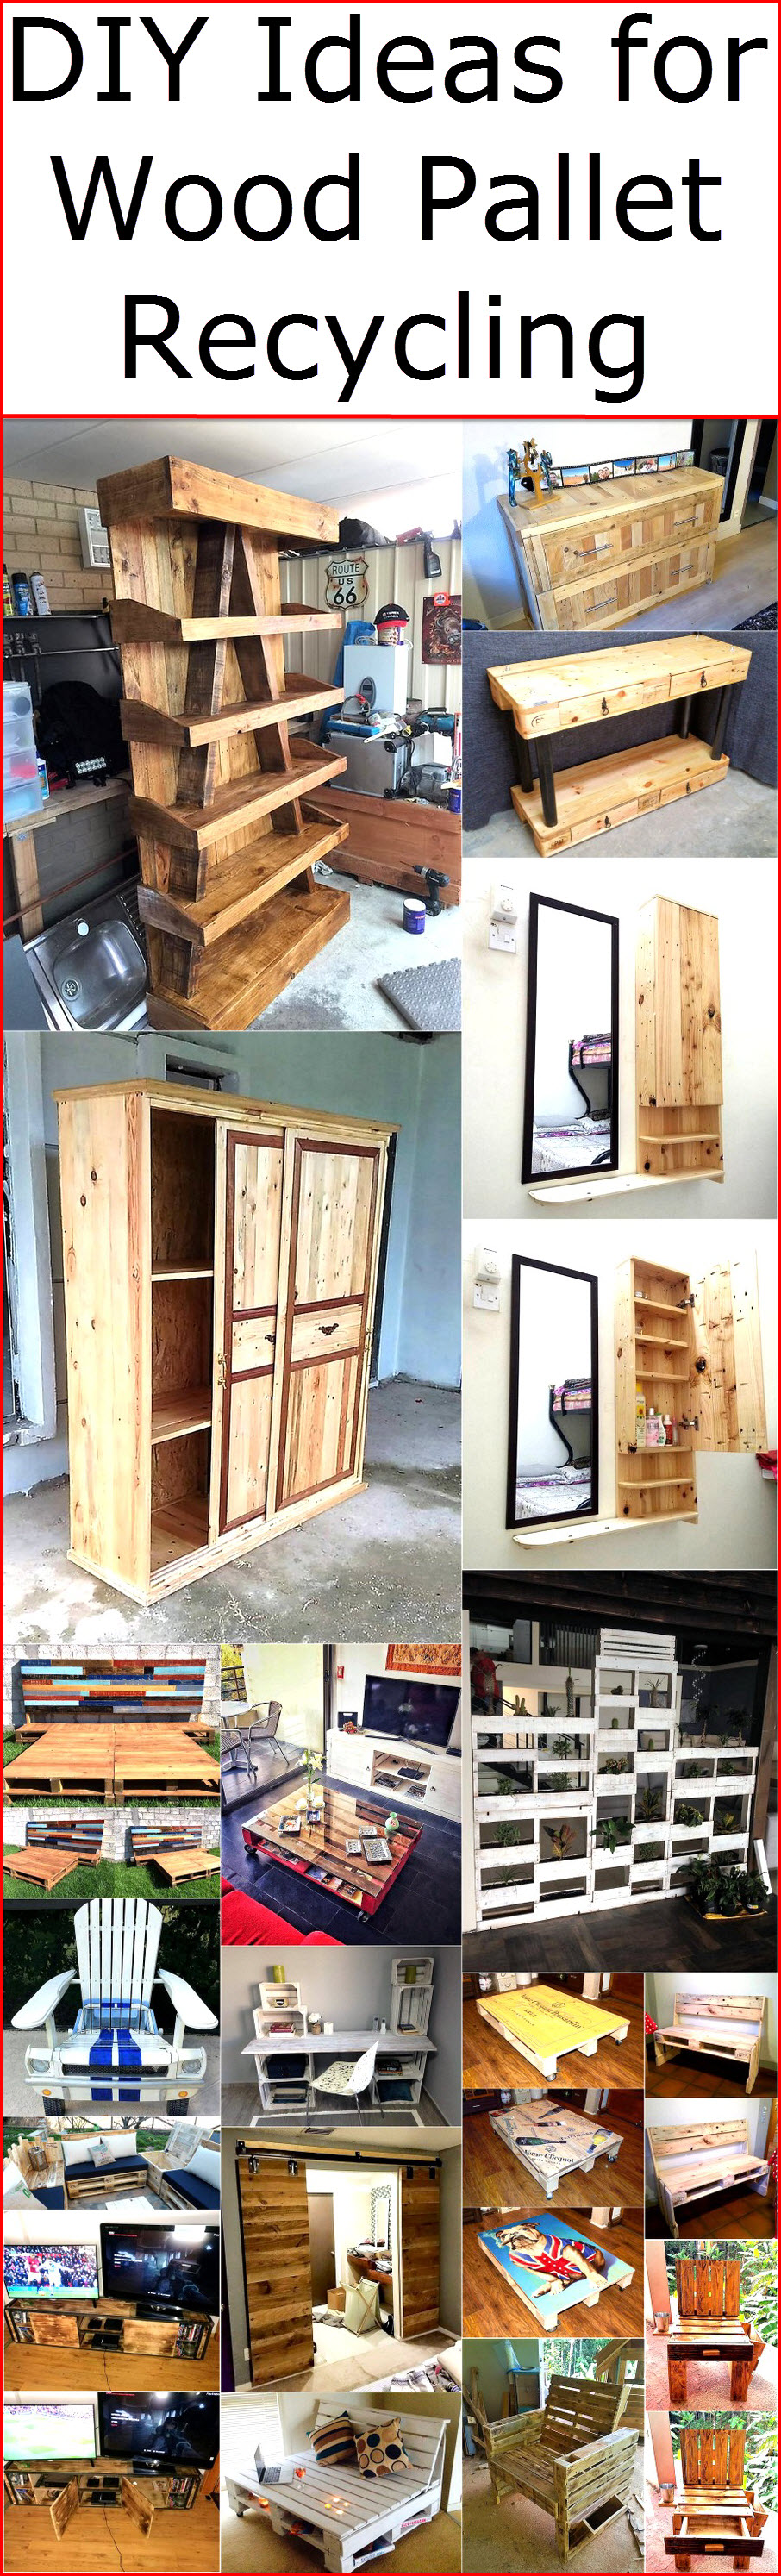 DIY Ideas for Wood Pallet Recycling